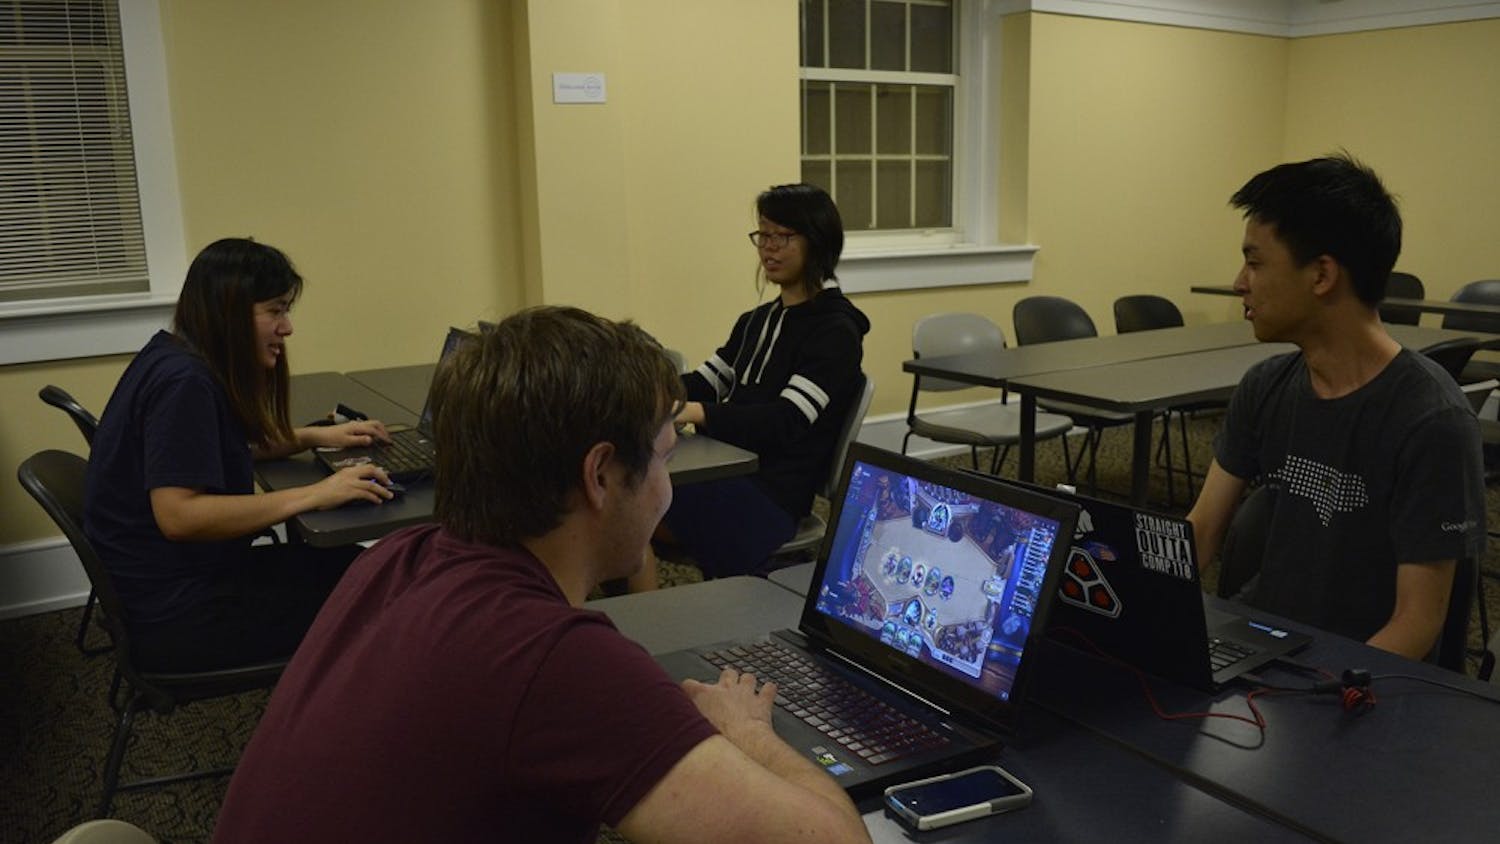 (From left) Joey Chau, Joe Plever (red shirt), Anne Chao (back right), and Cedric Nam play PC games at a UNC eSports meet up.